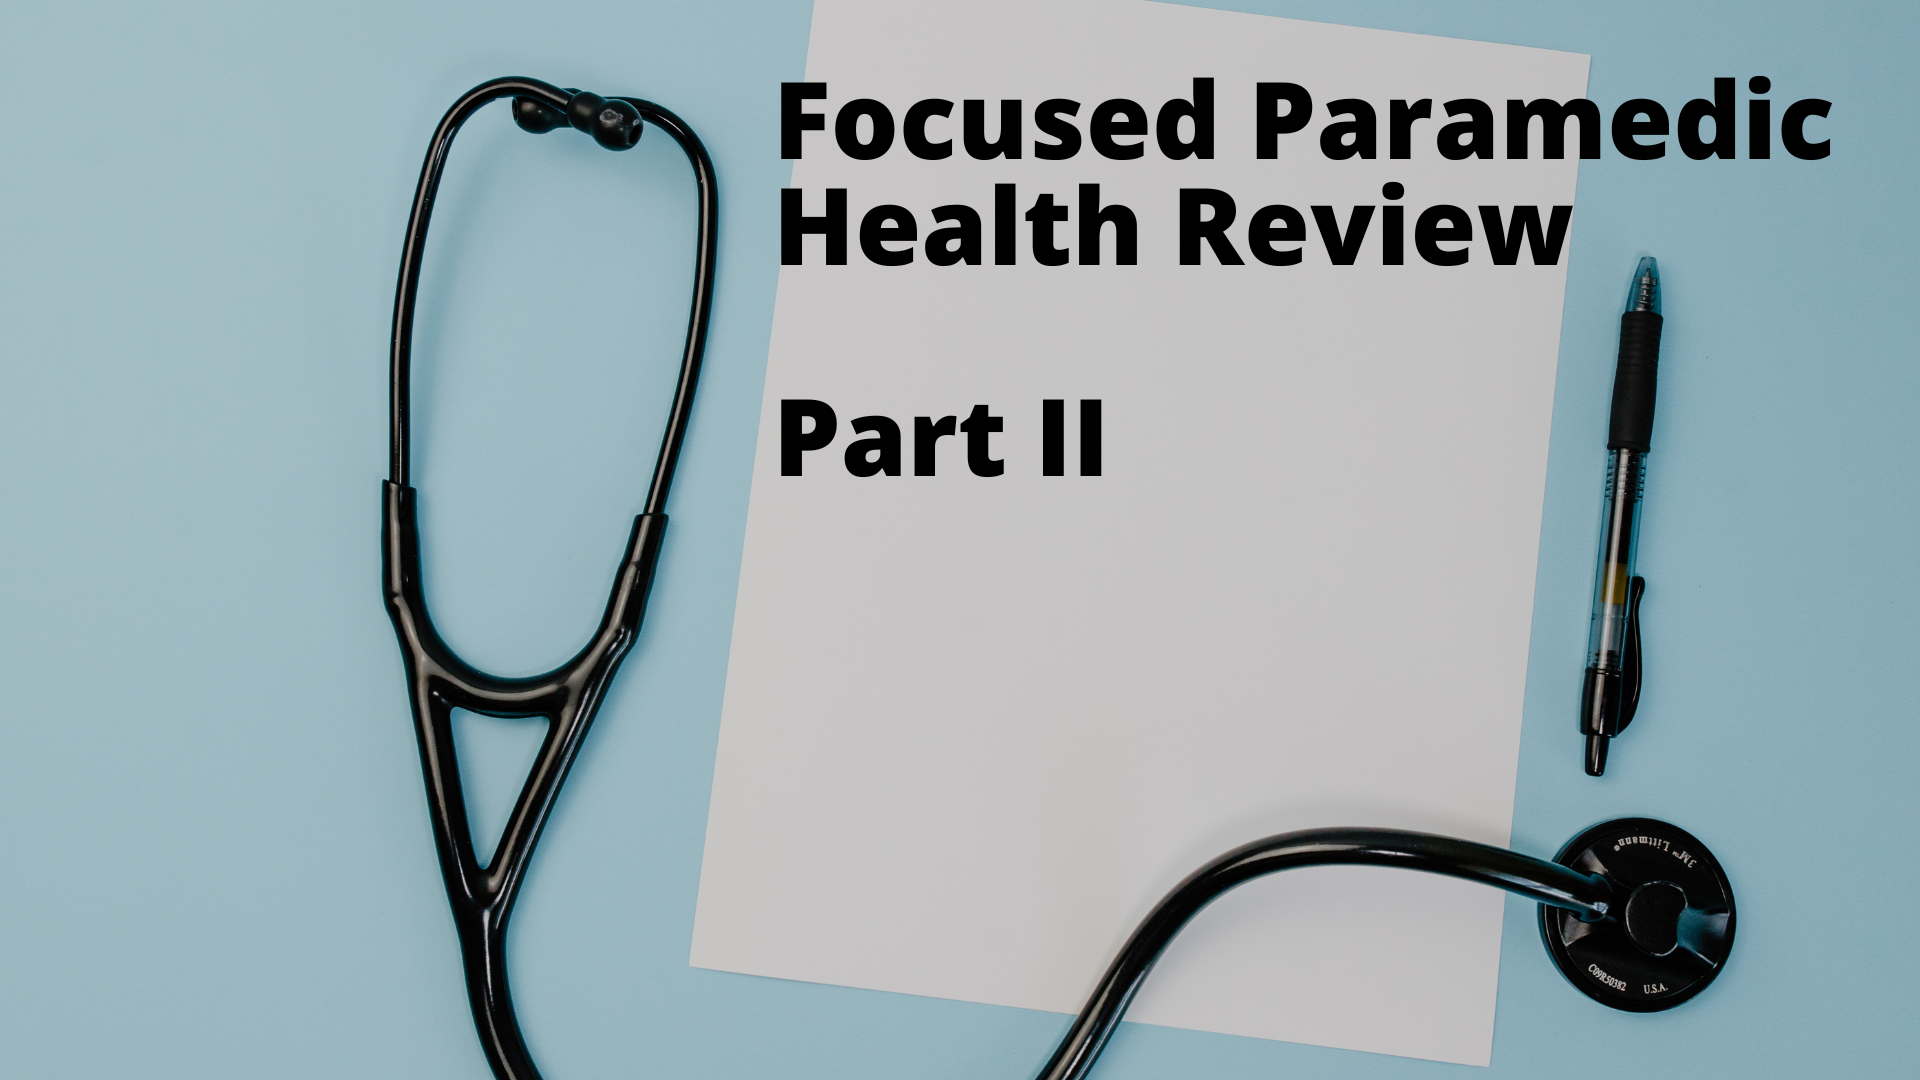 Module - Part II: The Pathways for a Focused Paramedic Health Review